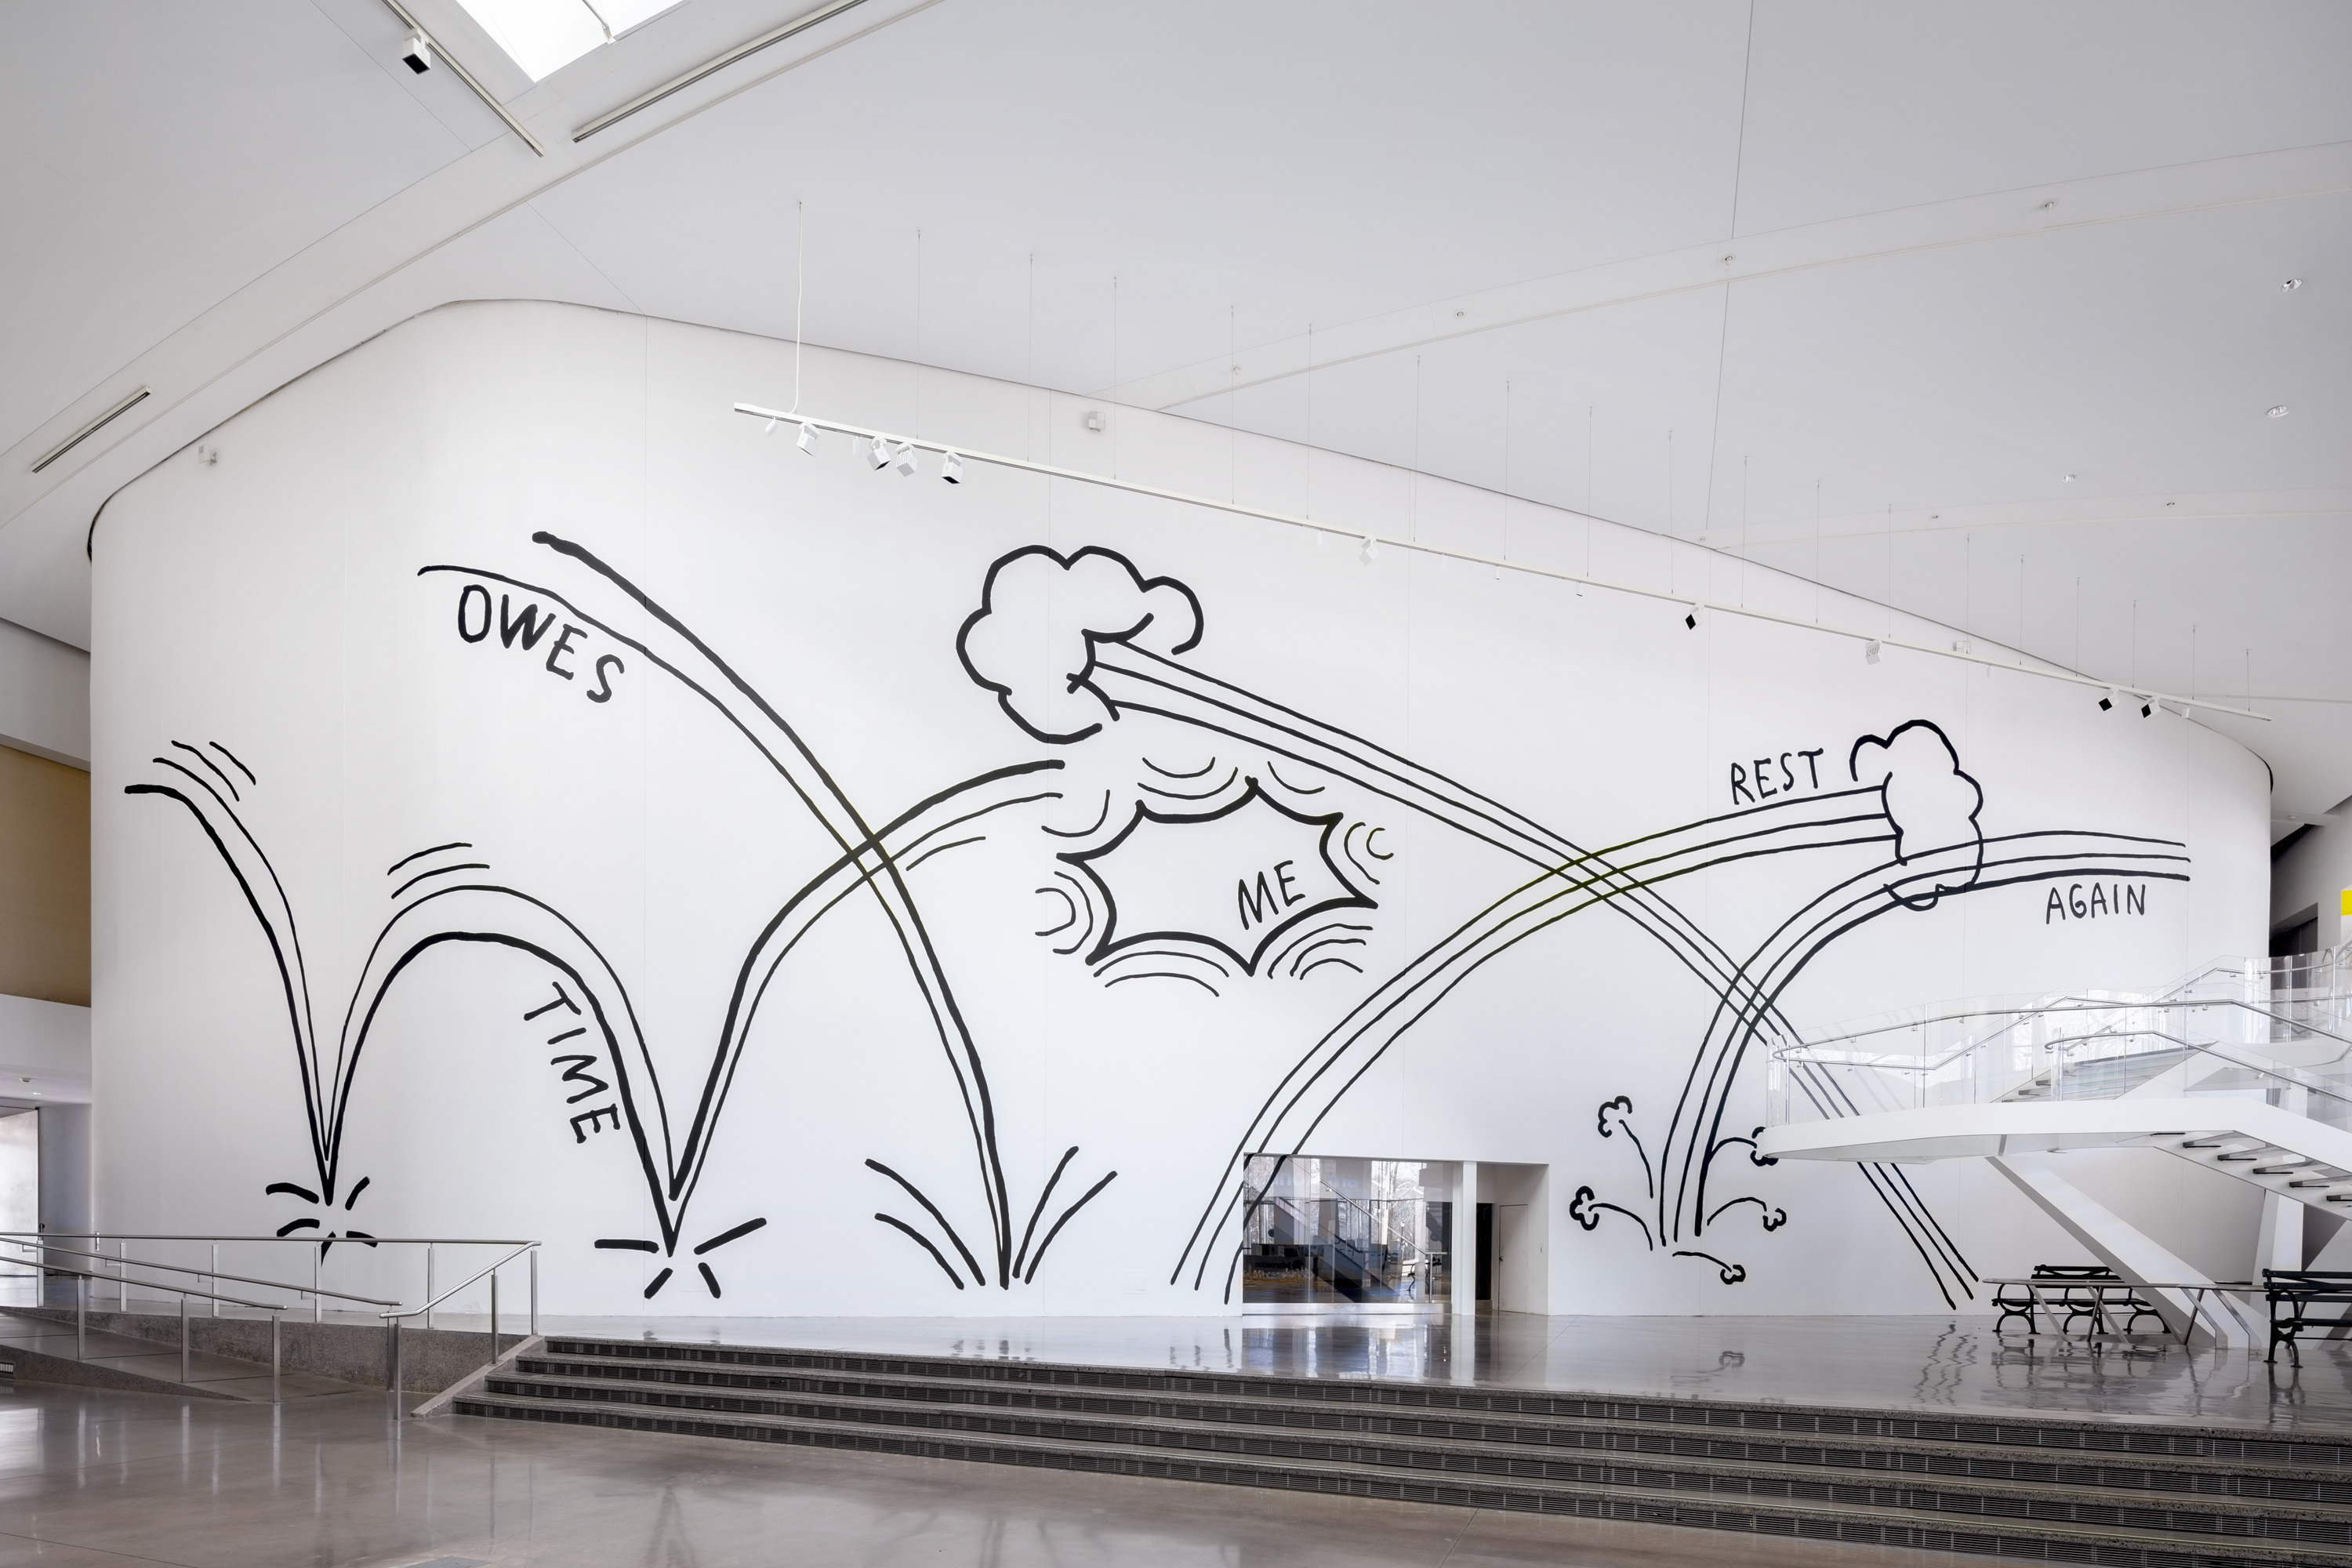 A photo is taken from a distance to show a large mural painted on a white wall. The mural is done in black paint and features the phrase "Time Owes Me Rest Again" arranged on comic book-esque action lines, which bounce and zip across the wall.